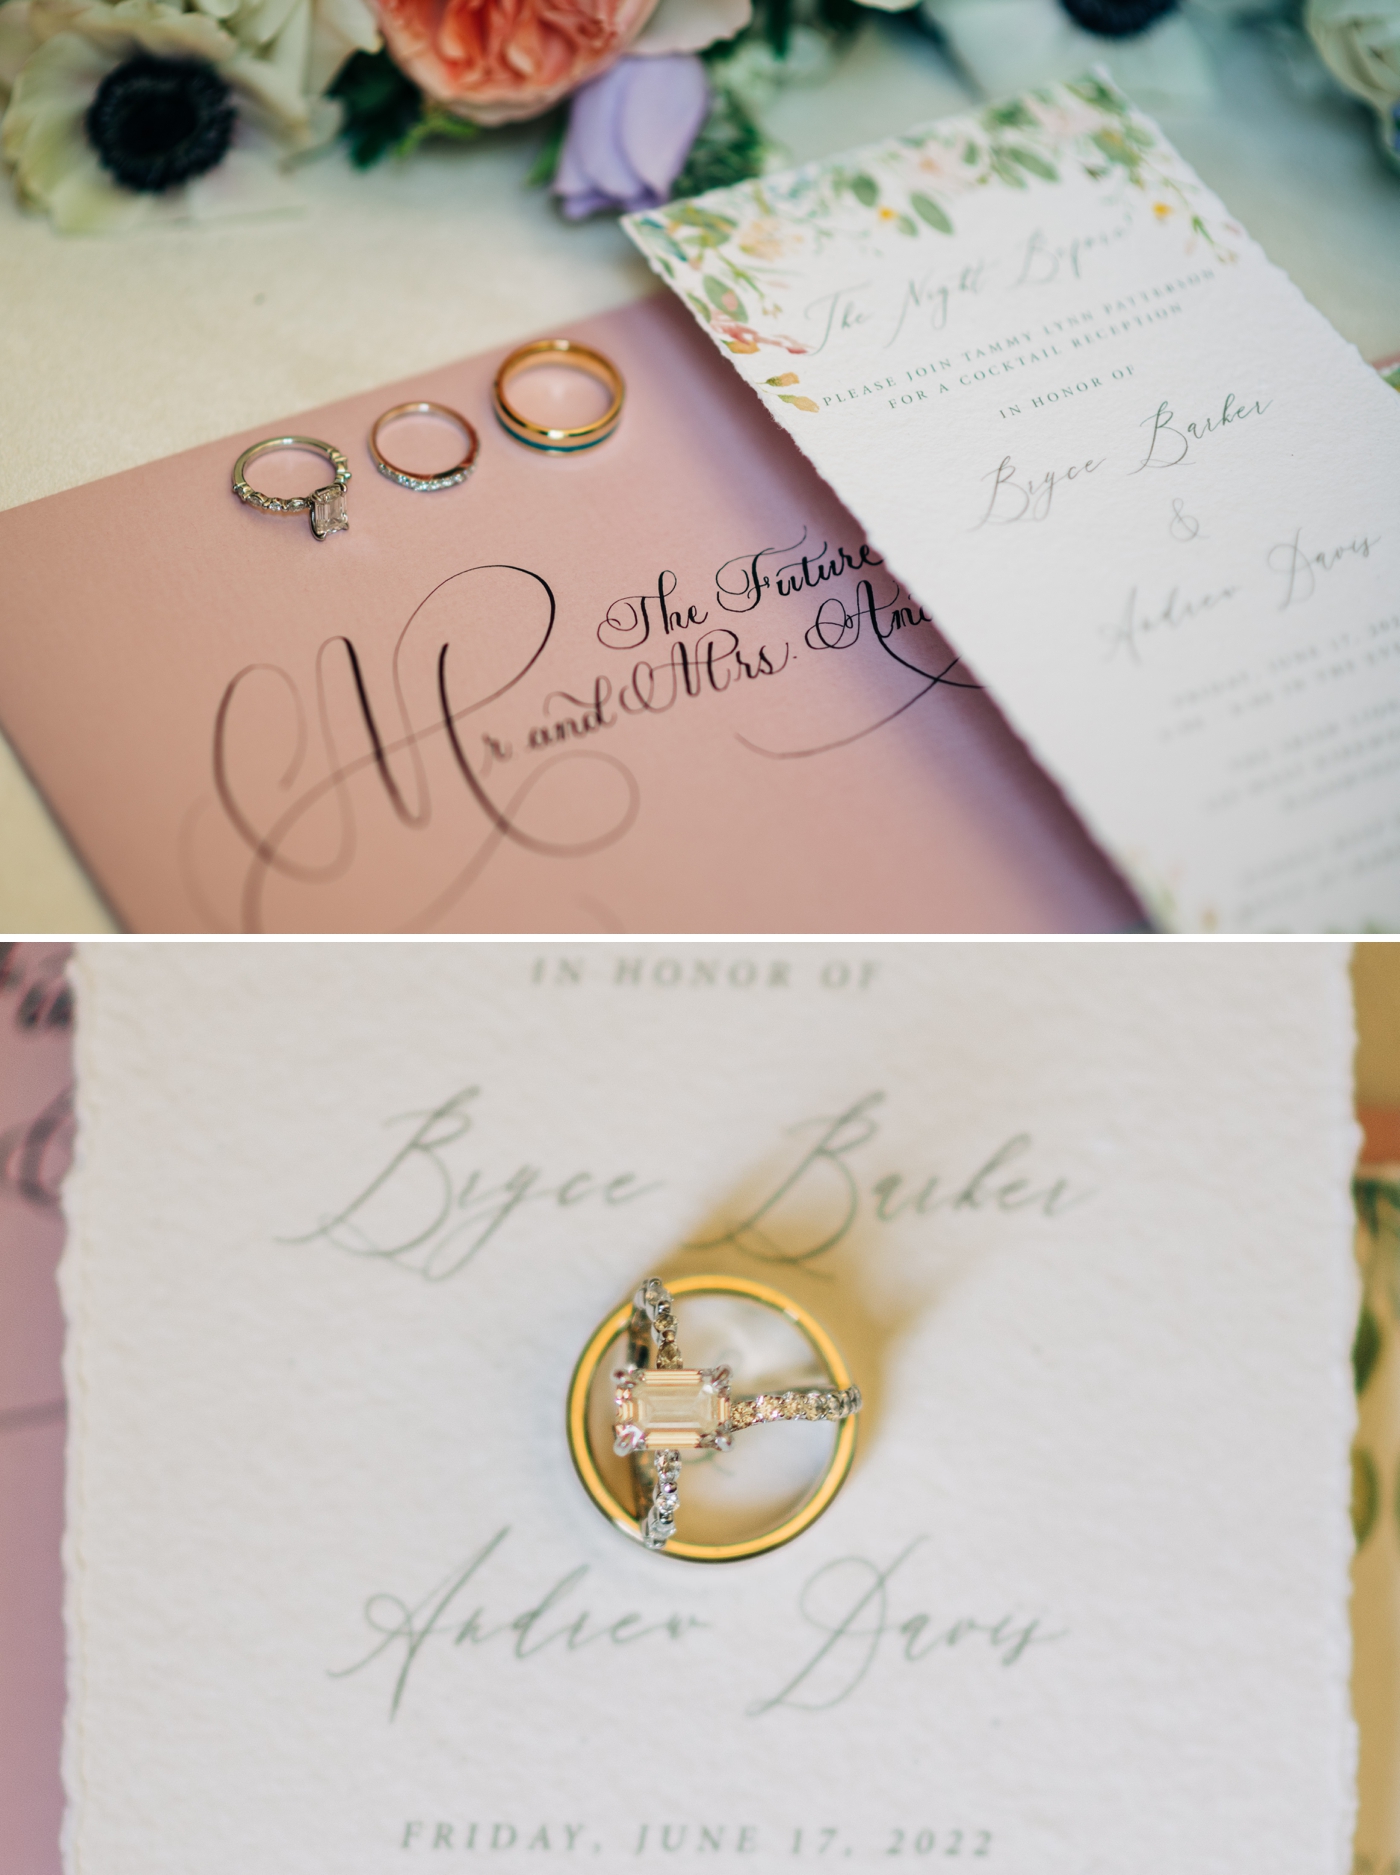 Blush and ivory wedding stationary with bride and groom wedding rings